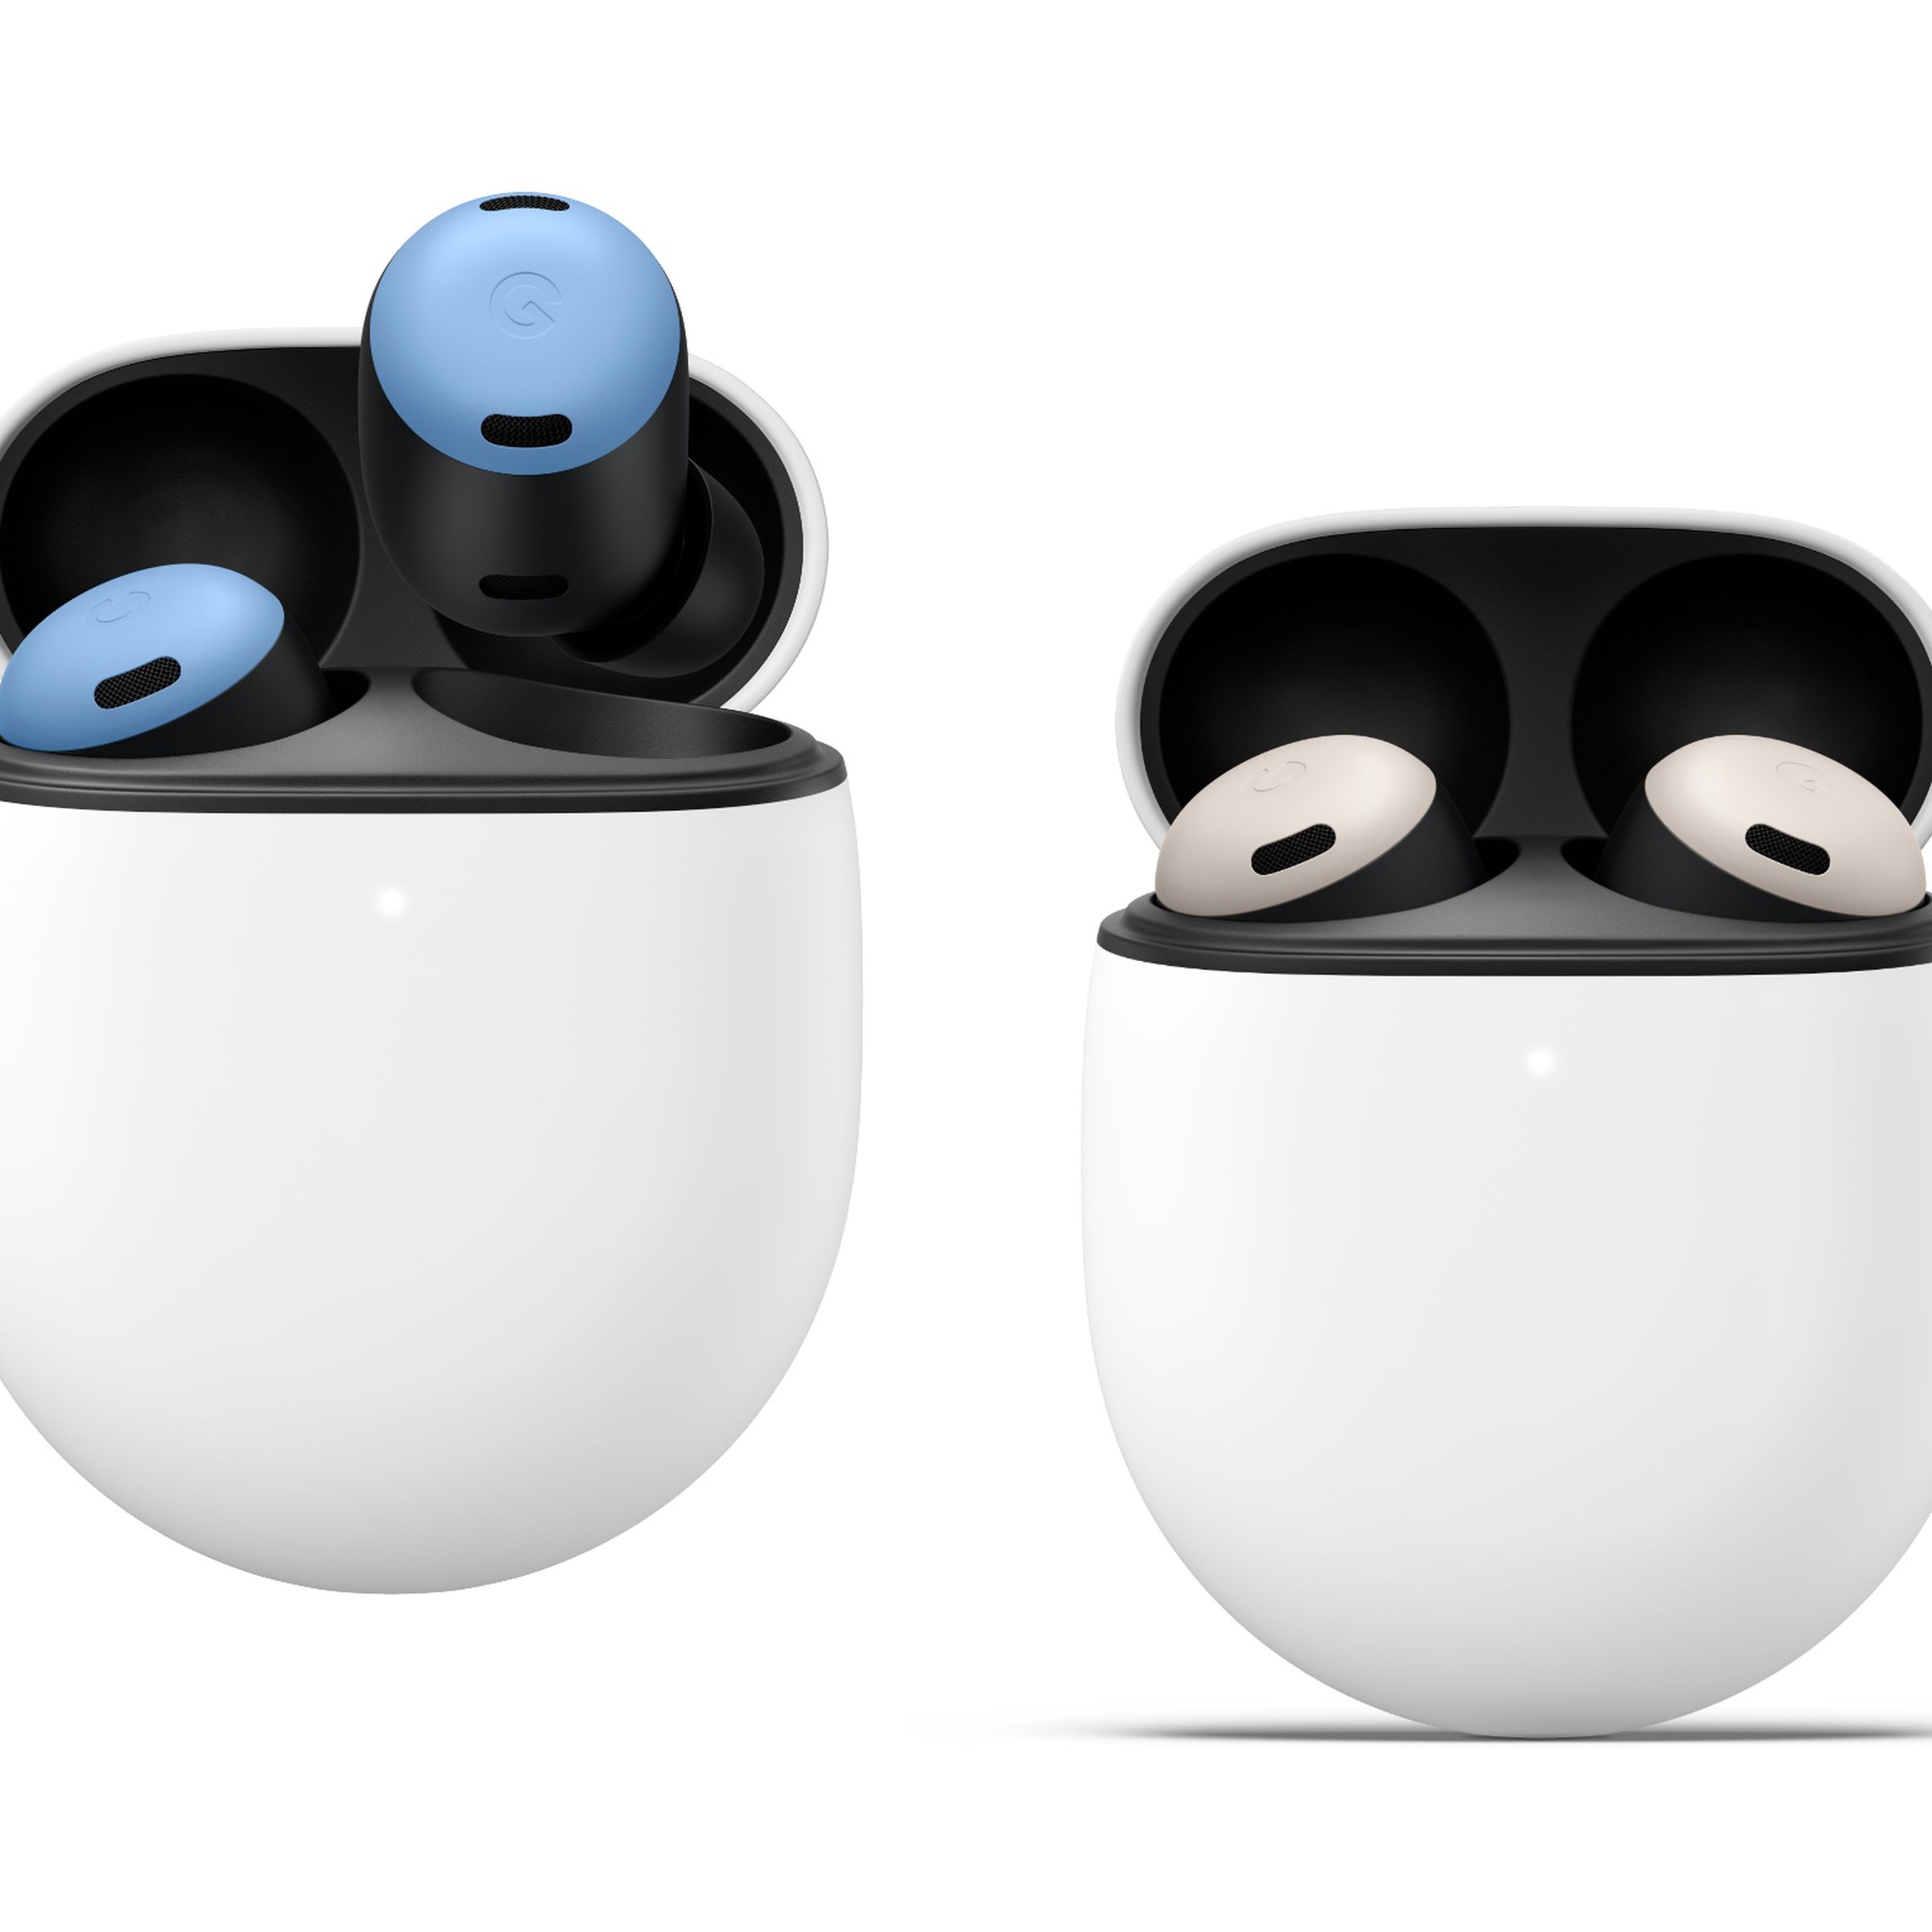 An image of the new blue and porcelain Pixel Buds Pro.